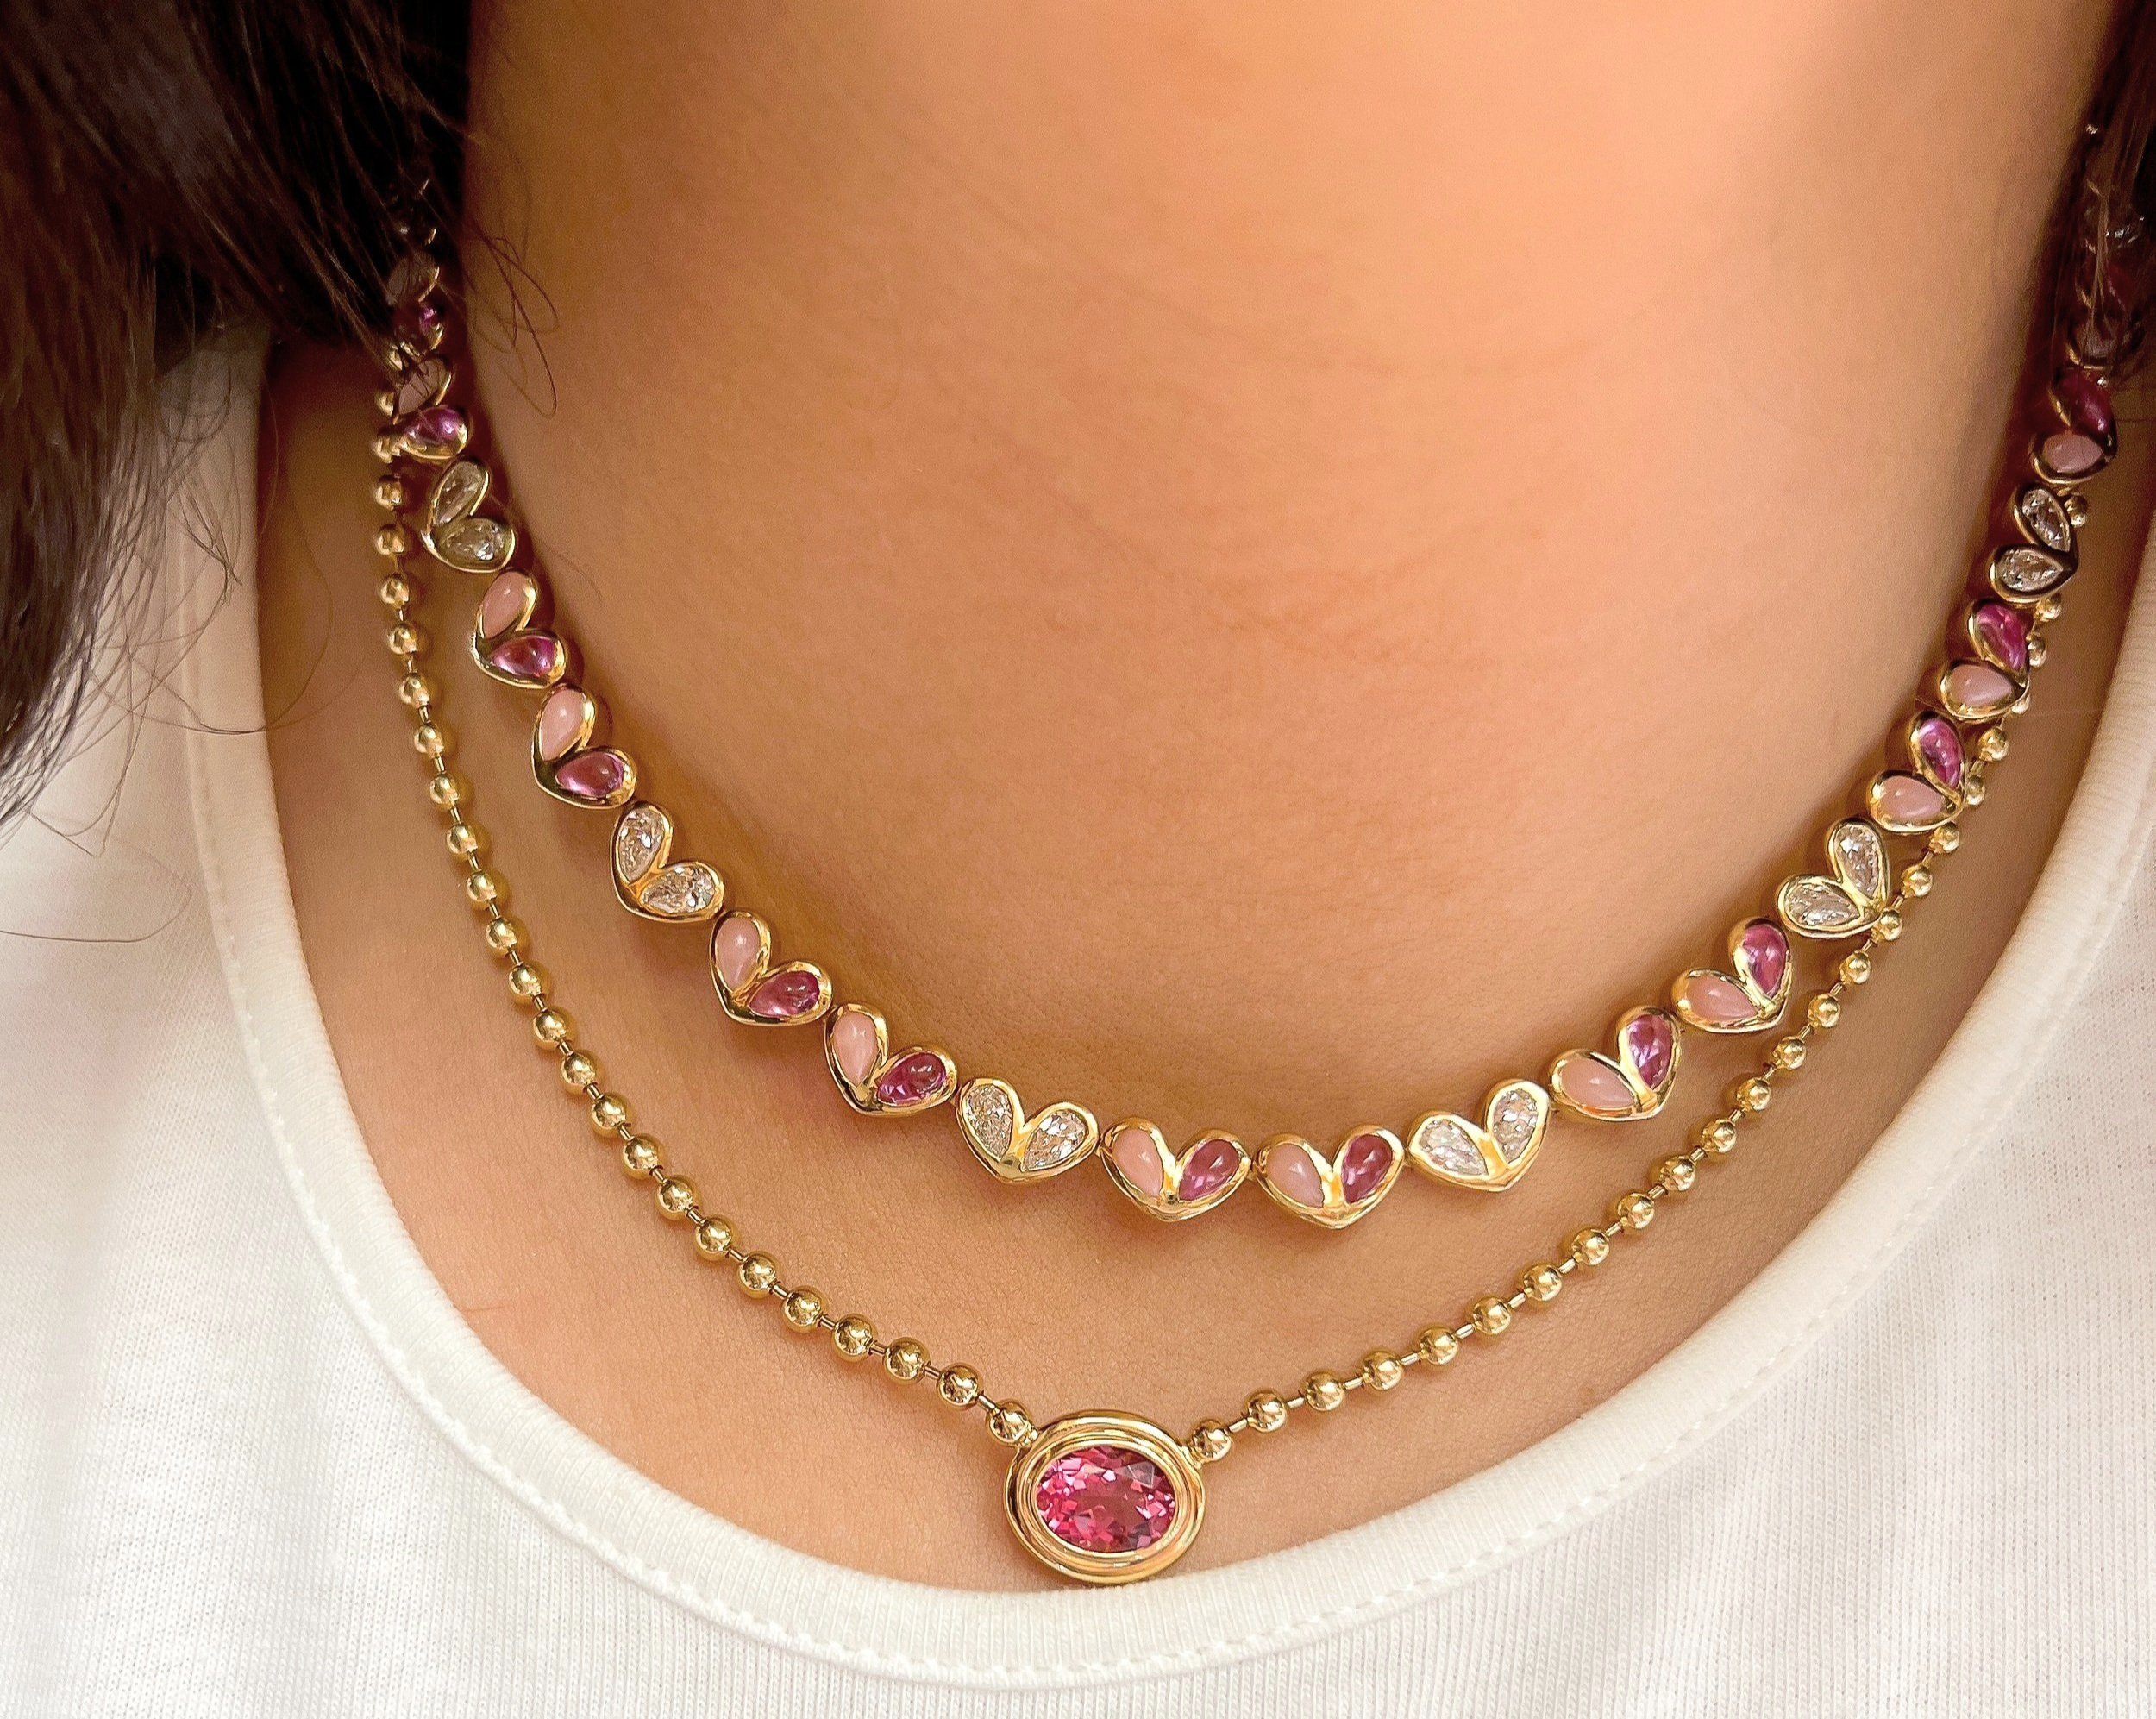 Sweetheart Tennis Necklace, coming soon to Gemella Jewels